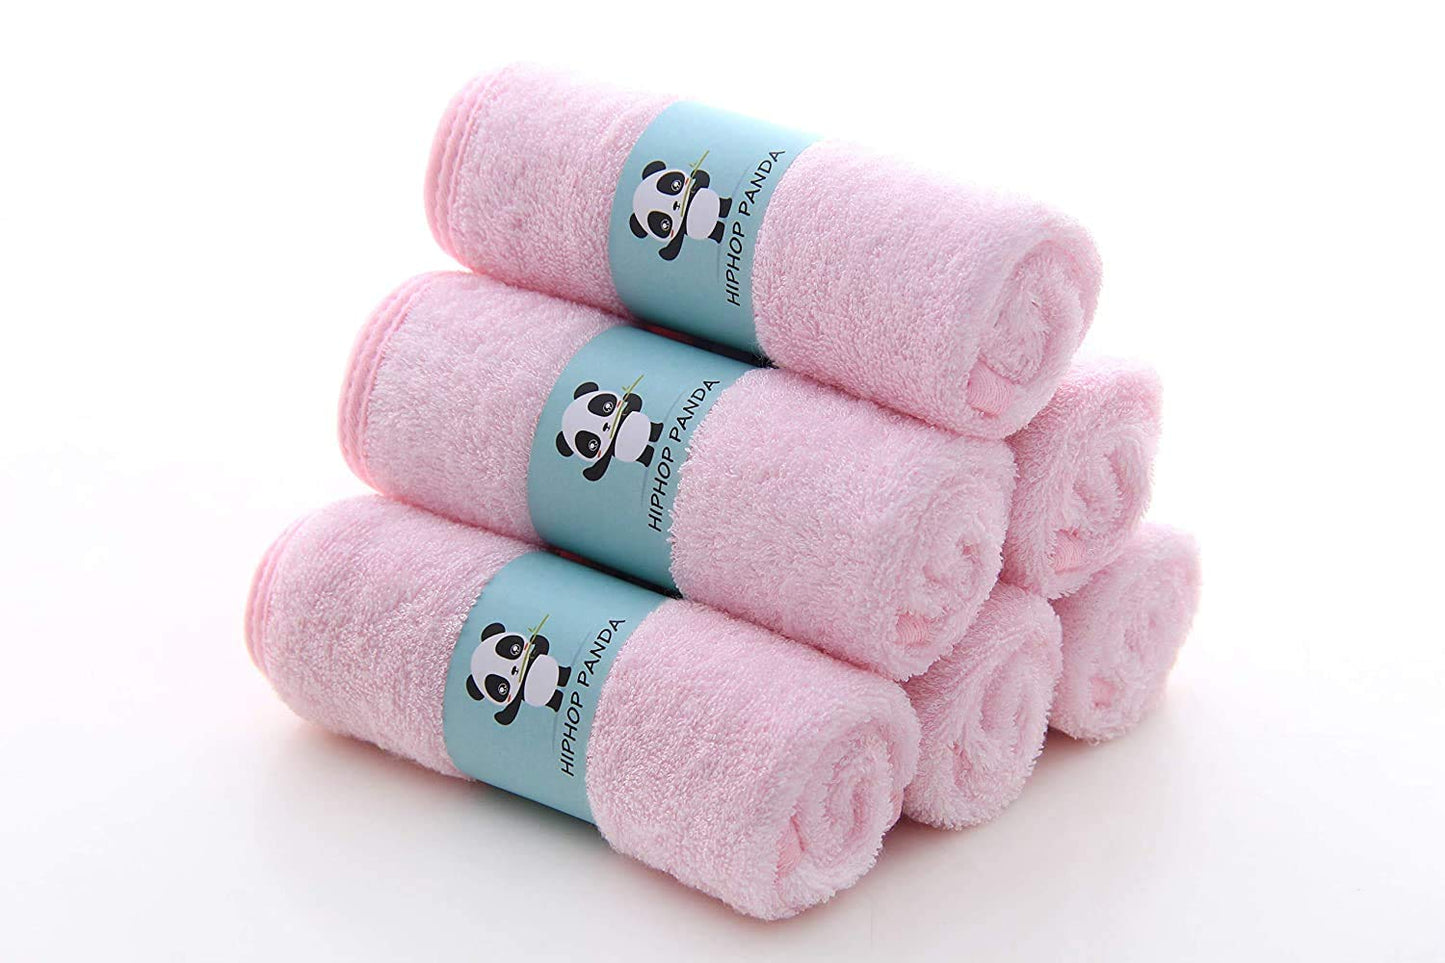 HIPHOP PANDA Baby Wash Clothes, Rayon Made from Bamboo - 2 Layer Ultra Soft Absorbent Washcloths for Boy - Newborn Face Towel - Makeup Remove Washcloths for Delicate Skin - (Gray, 6 Pack)